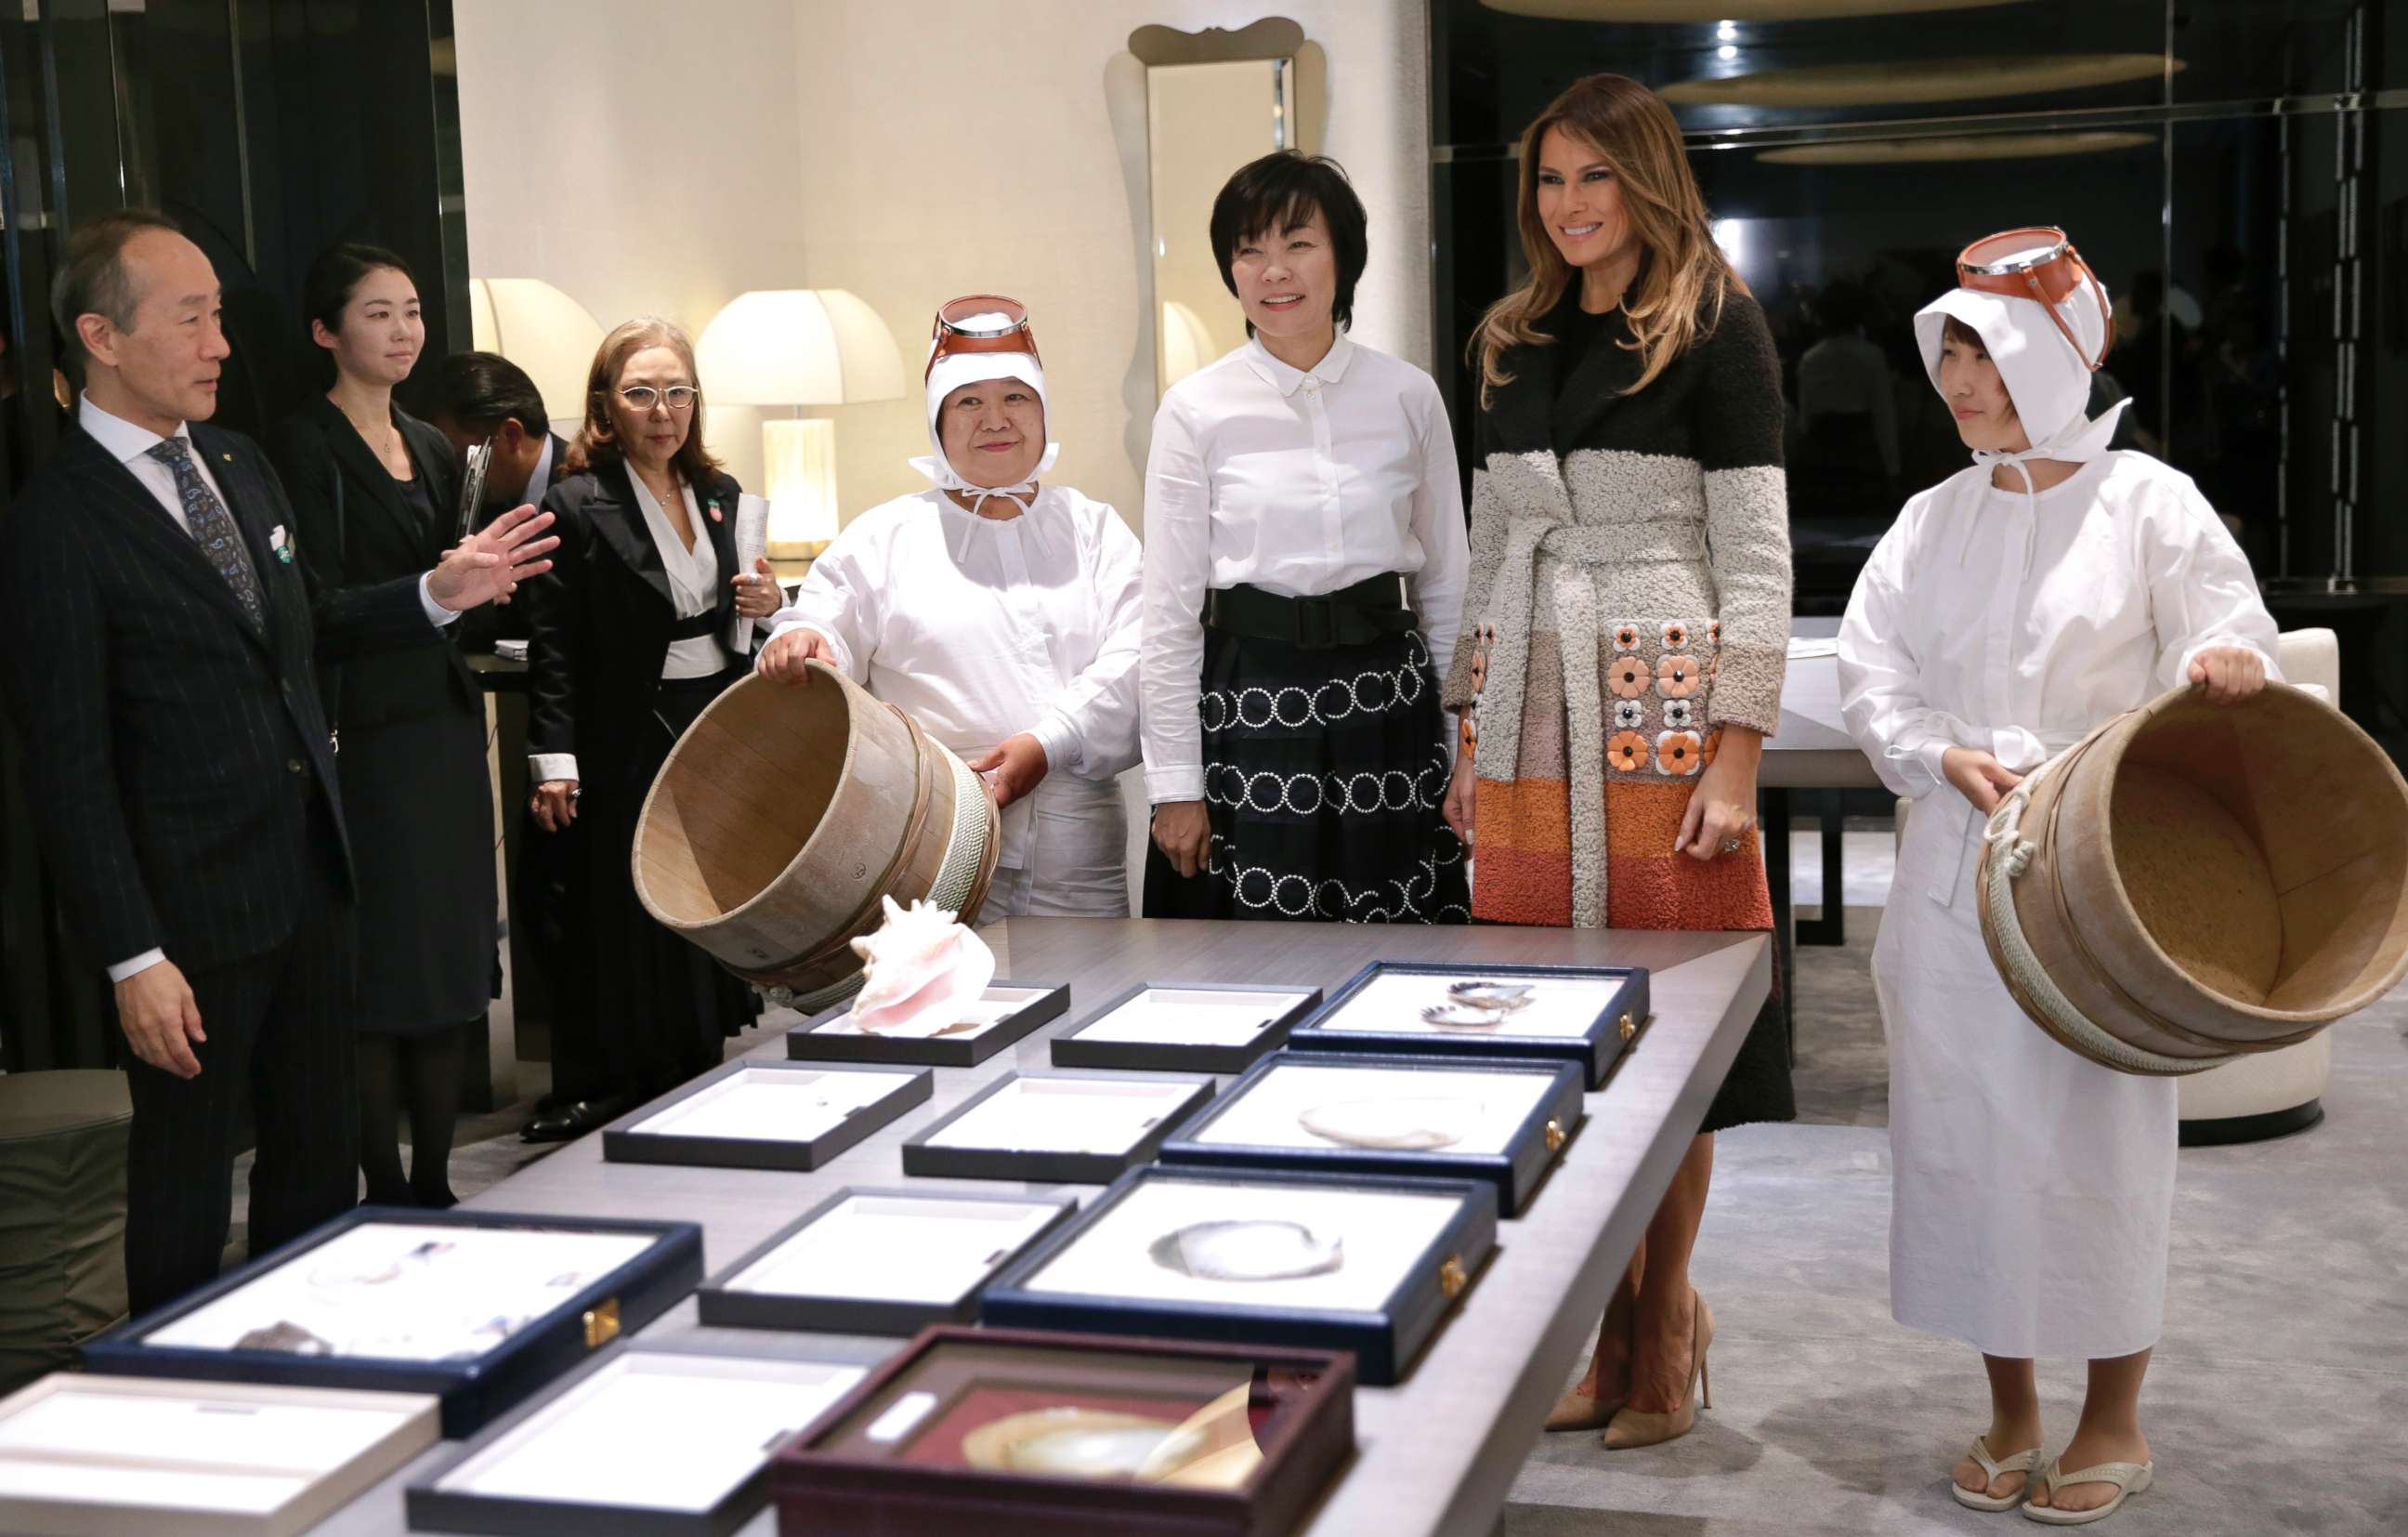 PHOTO: First lady Melania Trump and her Japanese counterpart Akie Abe, third from right, listen to a sales manager during their visit to a Japanese pearl jewelry maker at Ginza shopping district in Tokyo, Nov. 5, 2017.